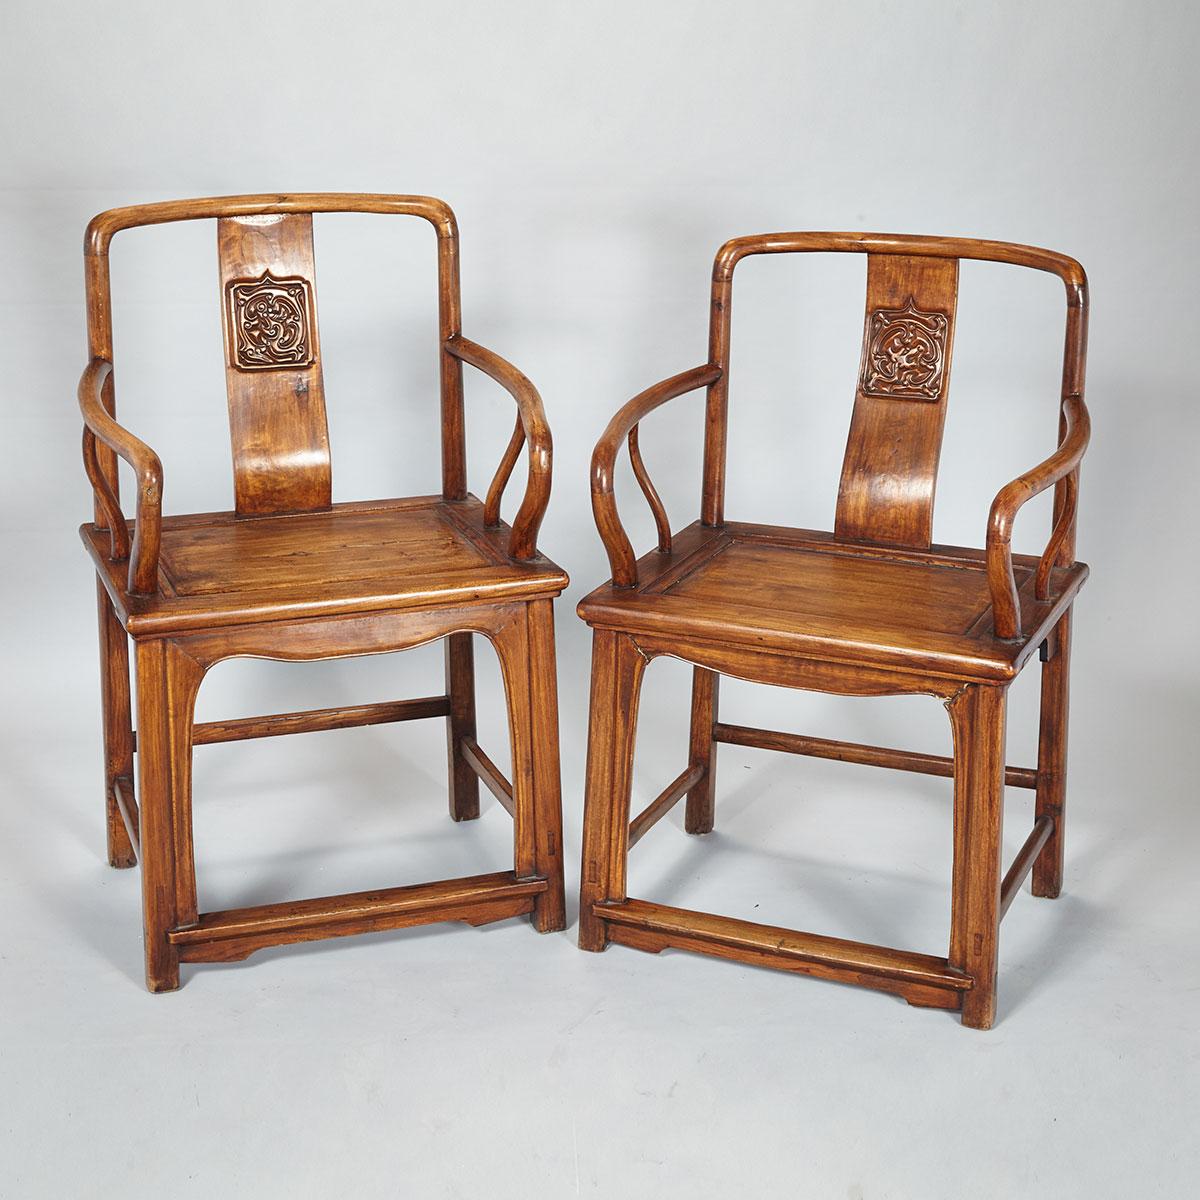 Pair of Elm Wood Horseshoe Back Chairs, Early 20th Century